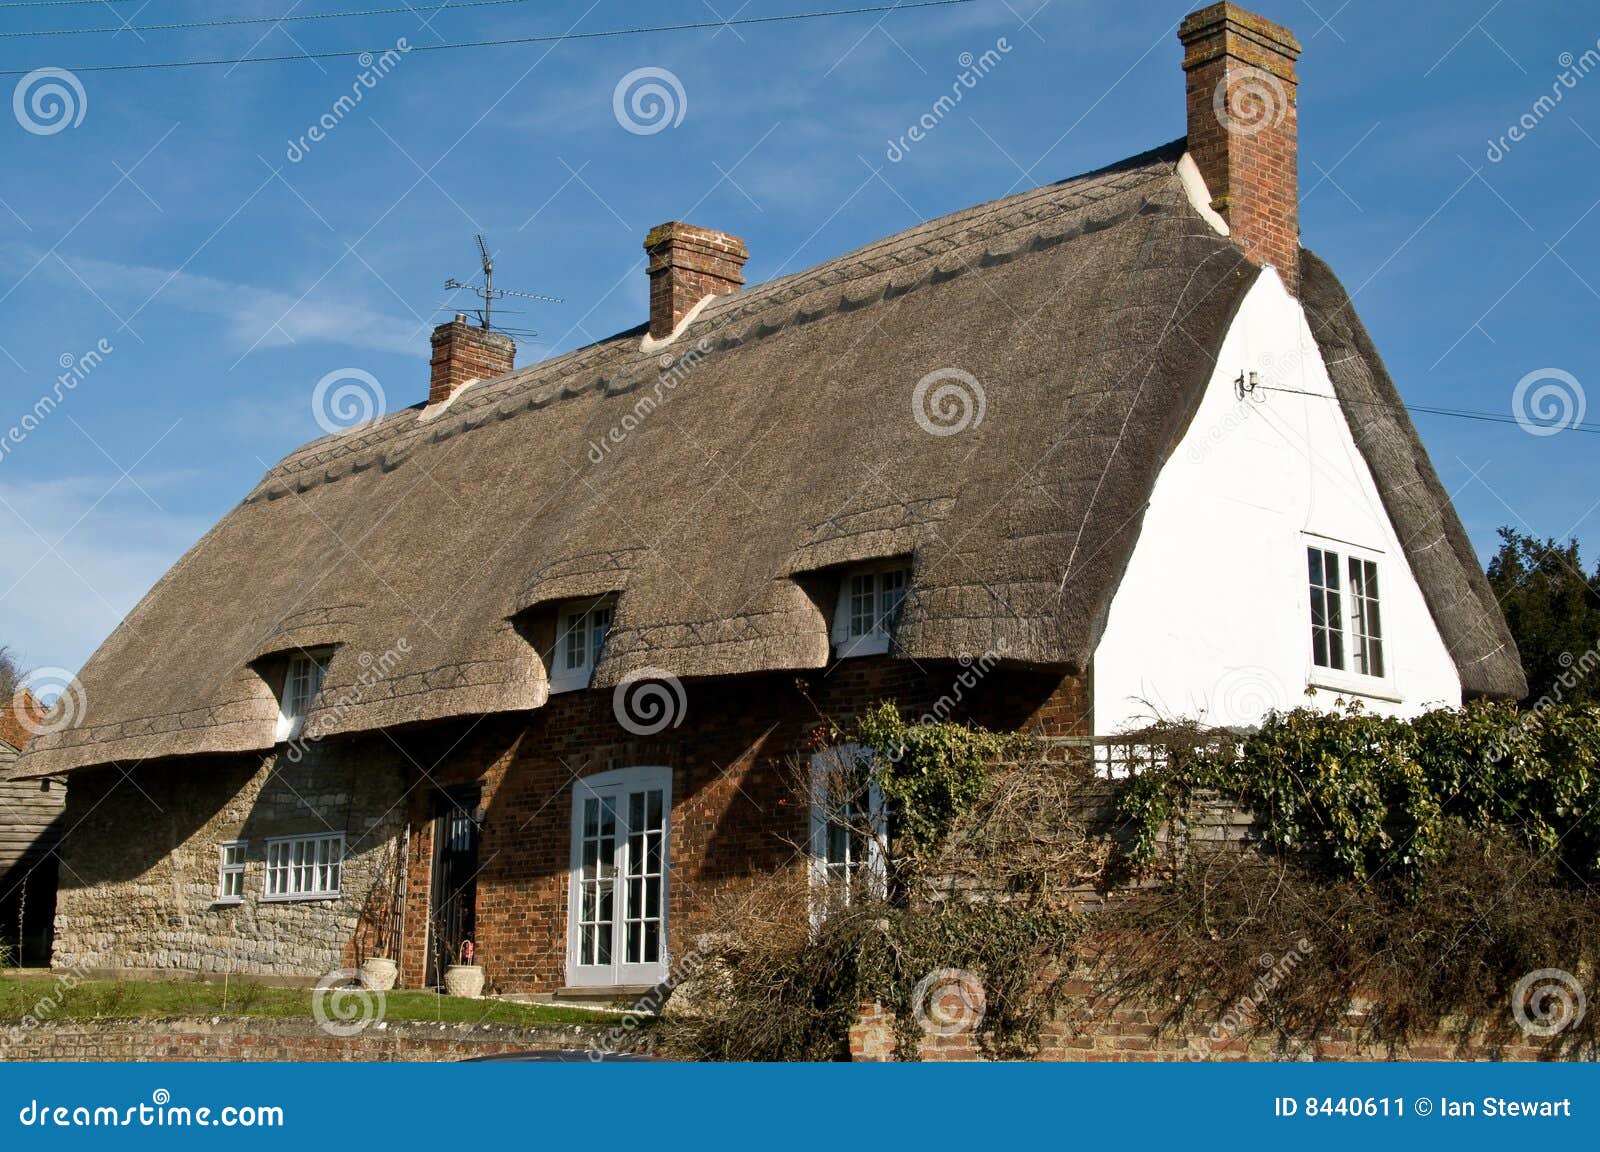 Classic British Rural Home Stock Image Image Of Element 8440611